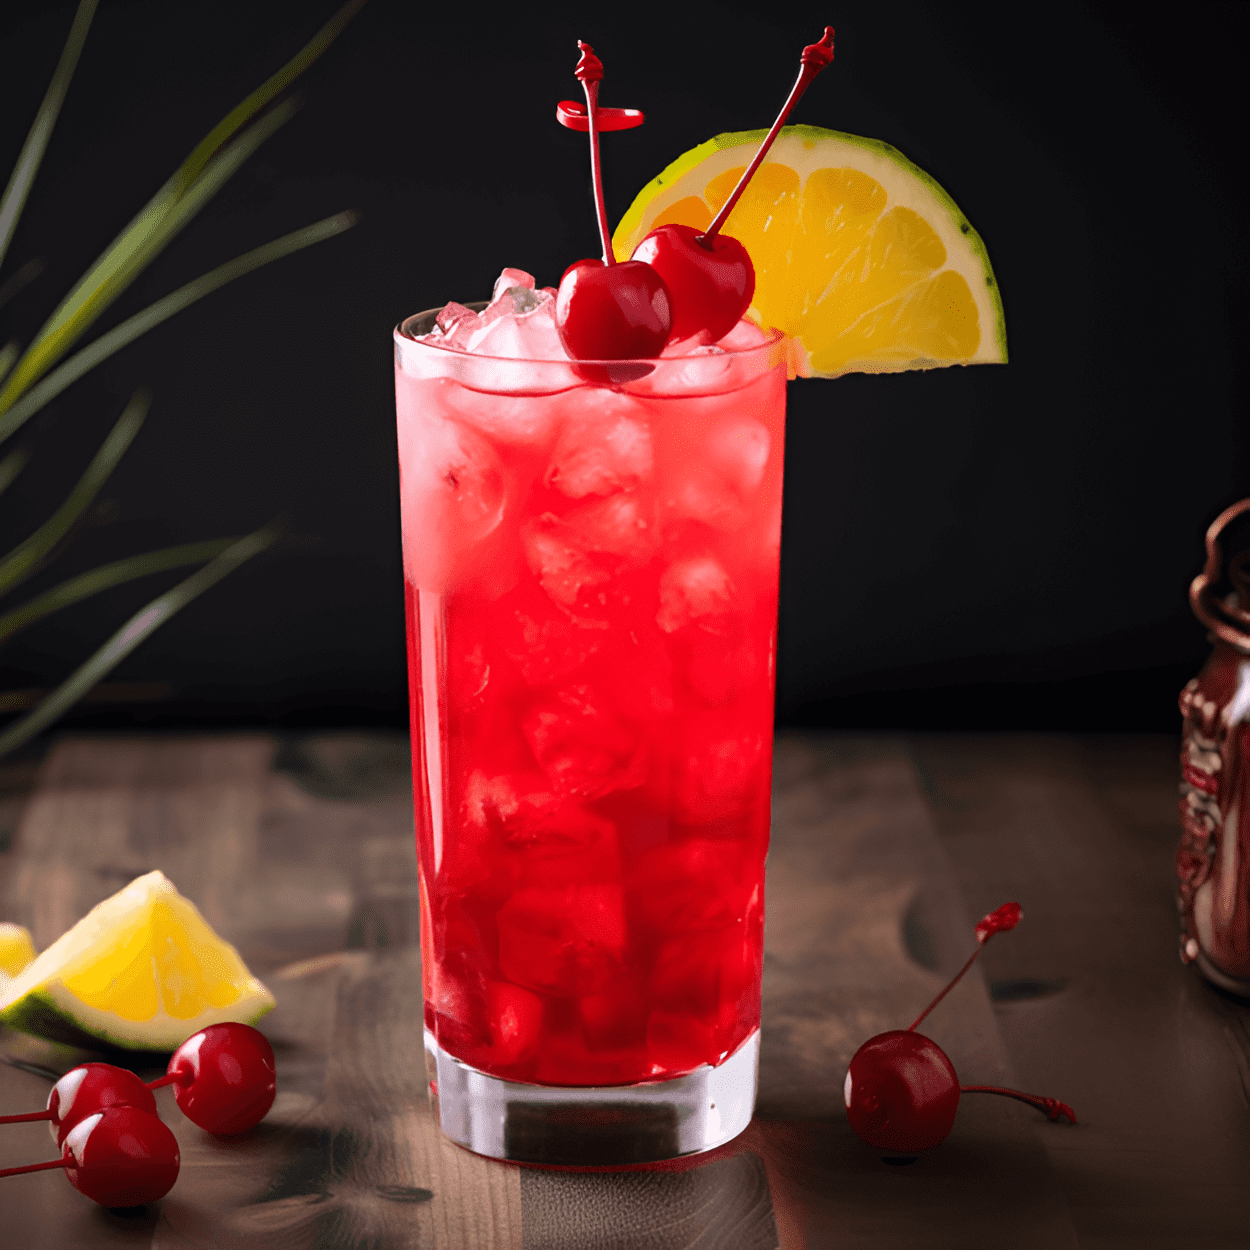 Belly Dancer Recipe - The Belly Dancer cocktail has a sweet and fruity taste with a hint of spice. The combination of rum, pineapple juice, and grenadine gives it a tropical flavor, while the dash of cinnamon adds a warm and spicy note.